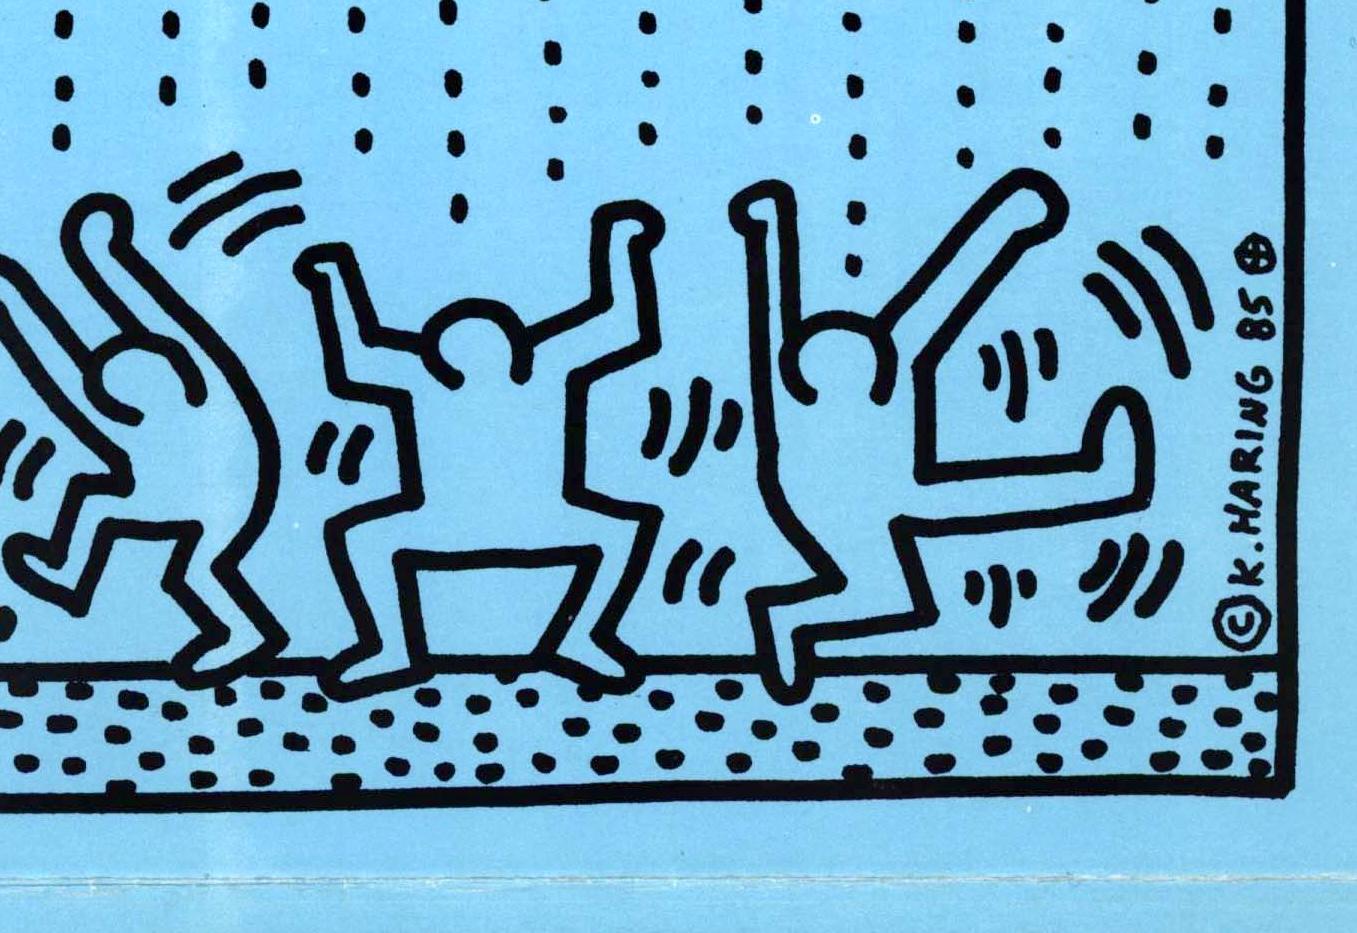 Keith Haring Rain Dance 1985 (Keith Haring posters) For Sale 4